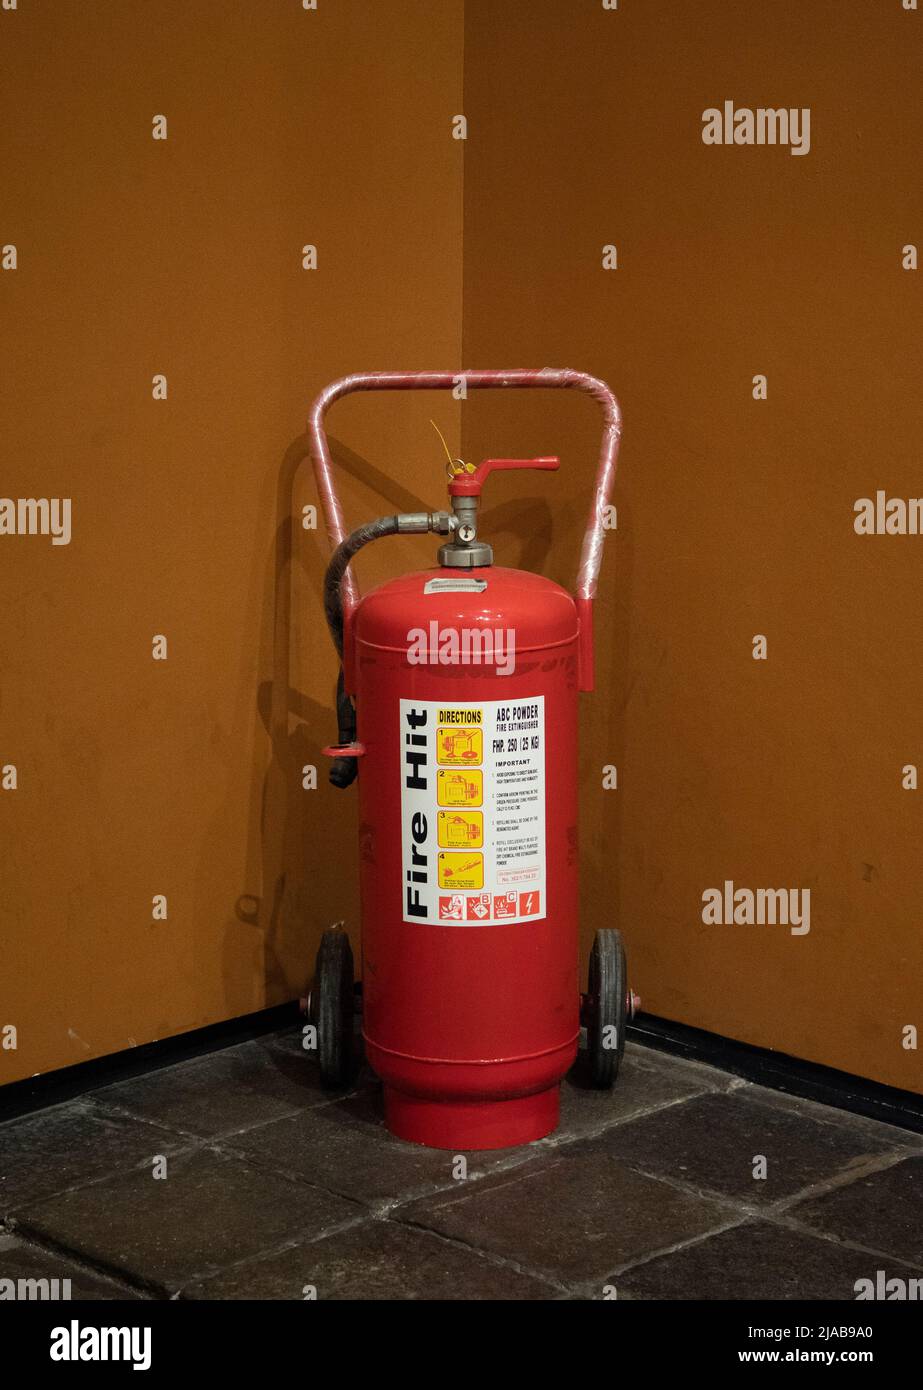 A fire extinguisher in the corner of the room is available in a fire emergency. Stock Photo